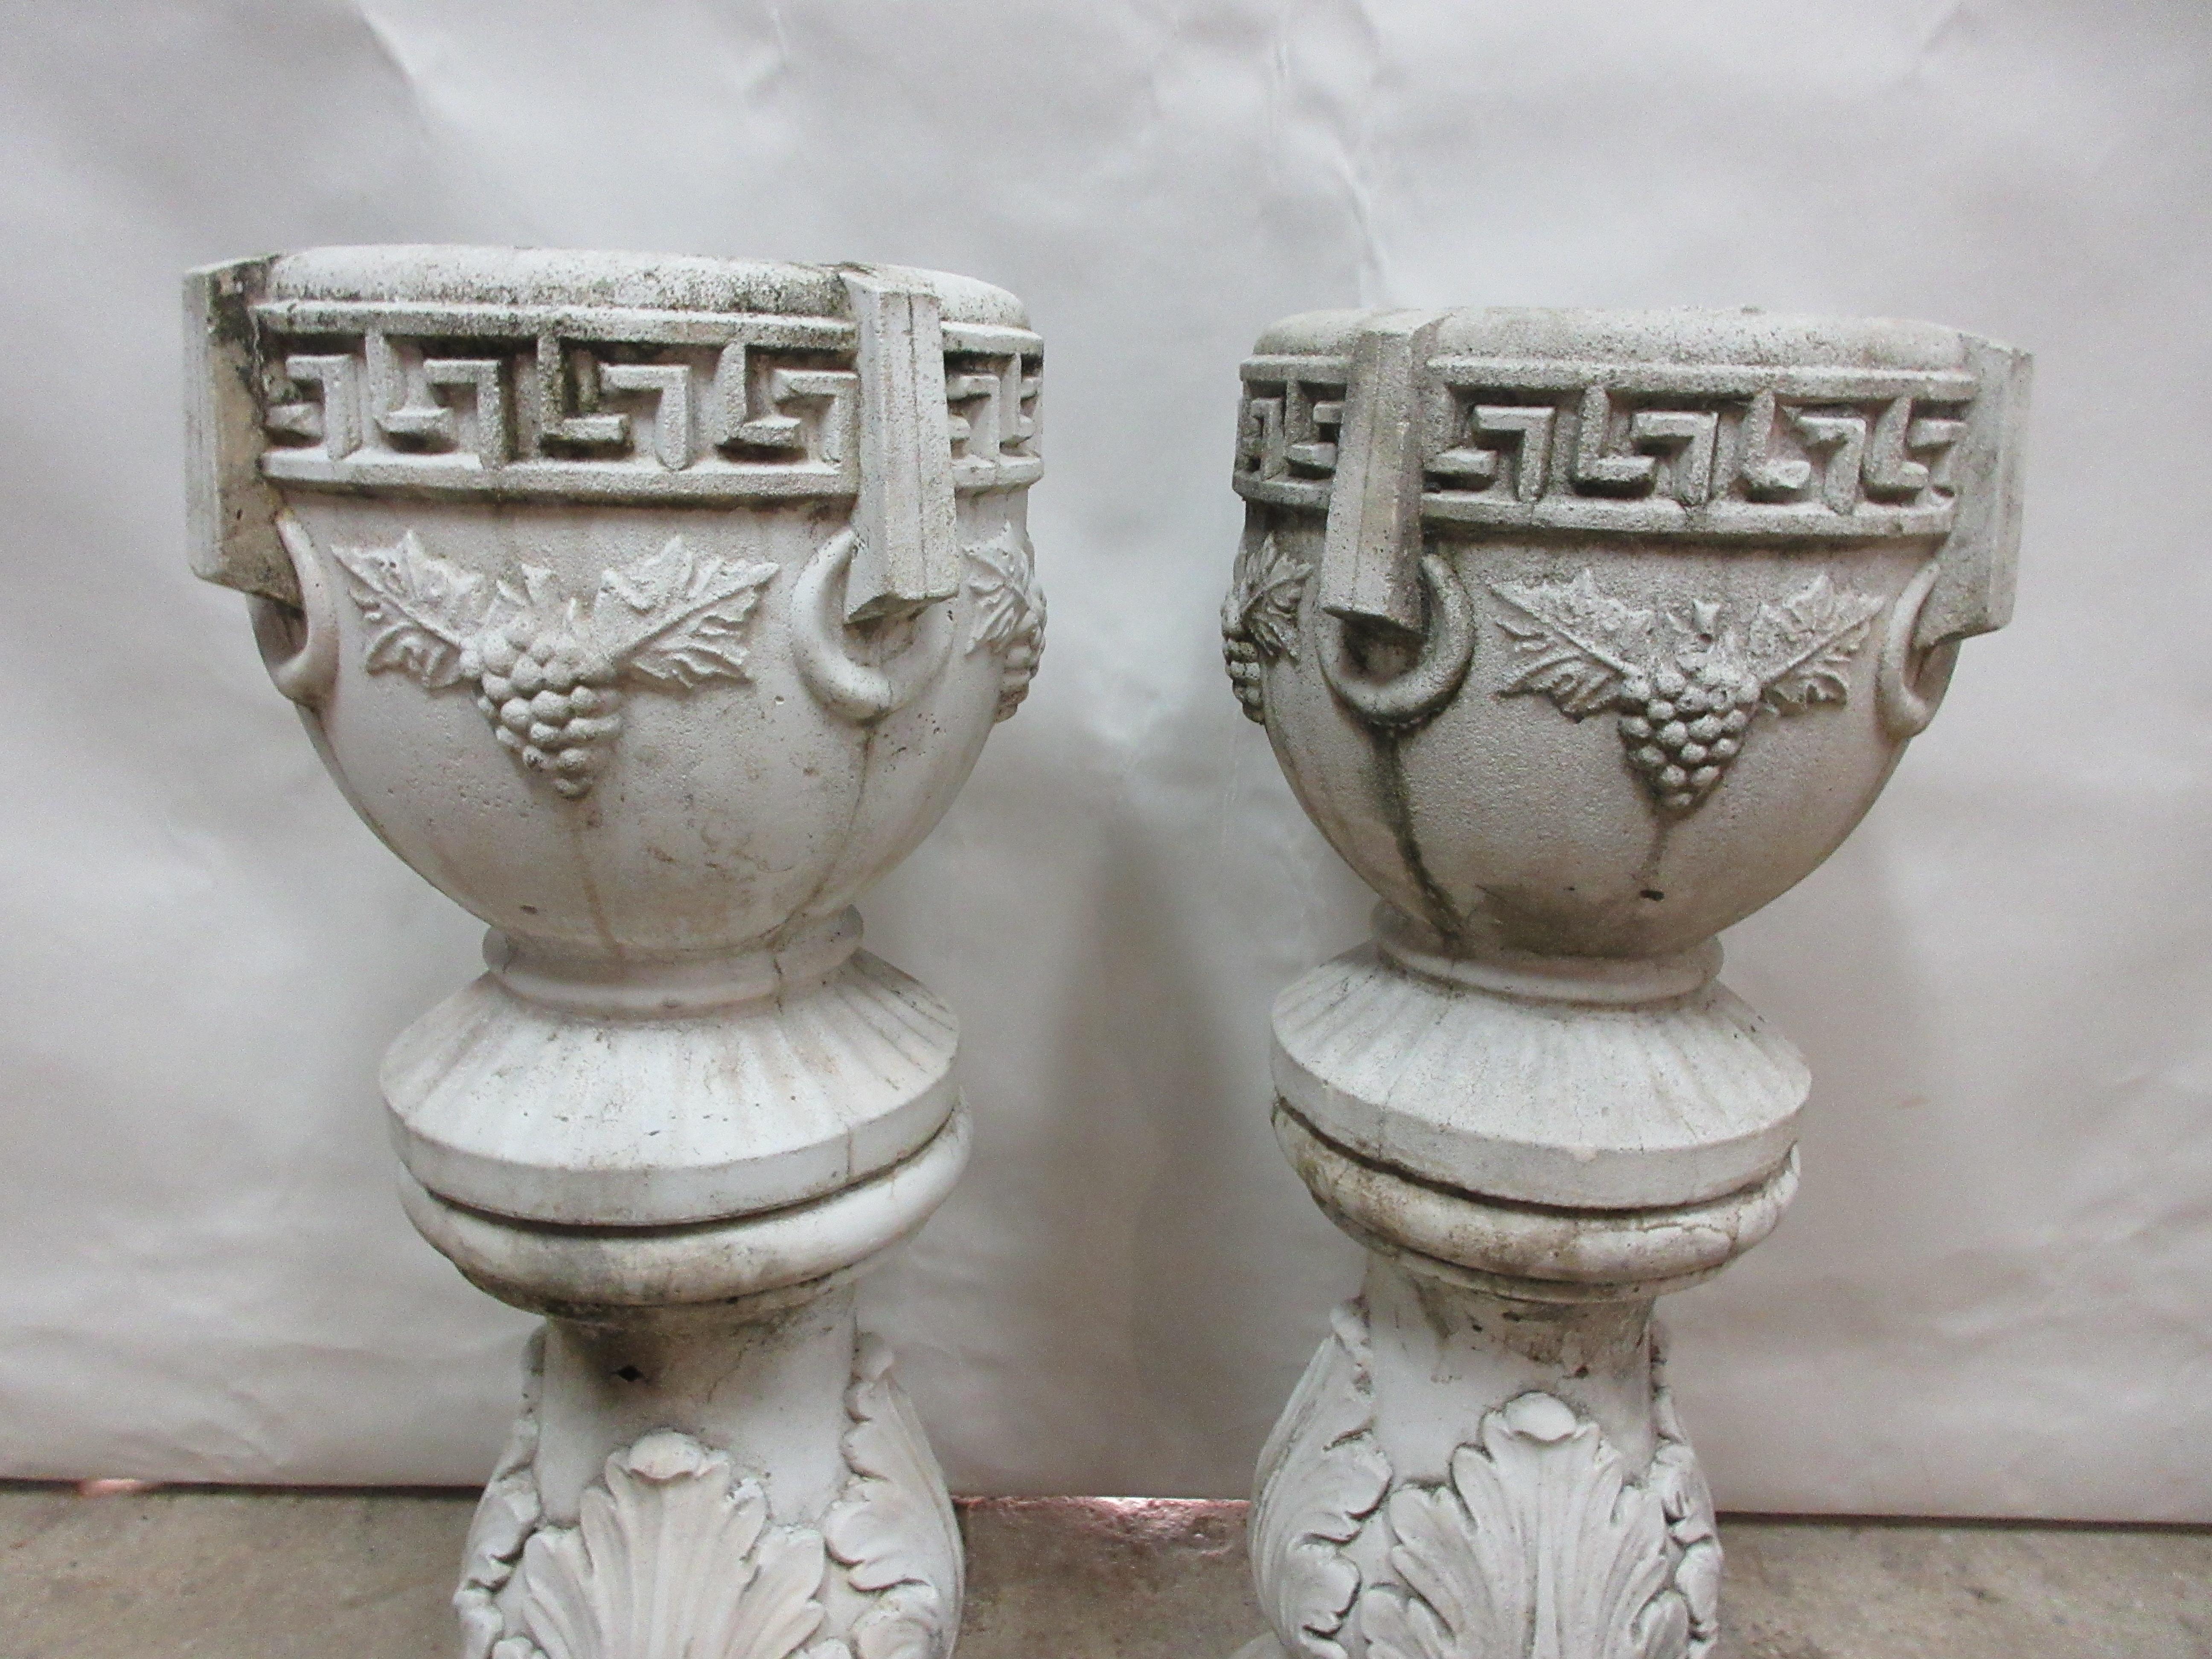 These 2 Antique Concrete Grecian Greek key urns & pedestals where found at an Estate auction in Palm Beach Florida. The Pedestals are marked 